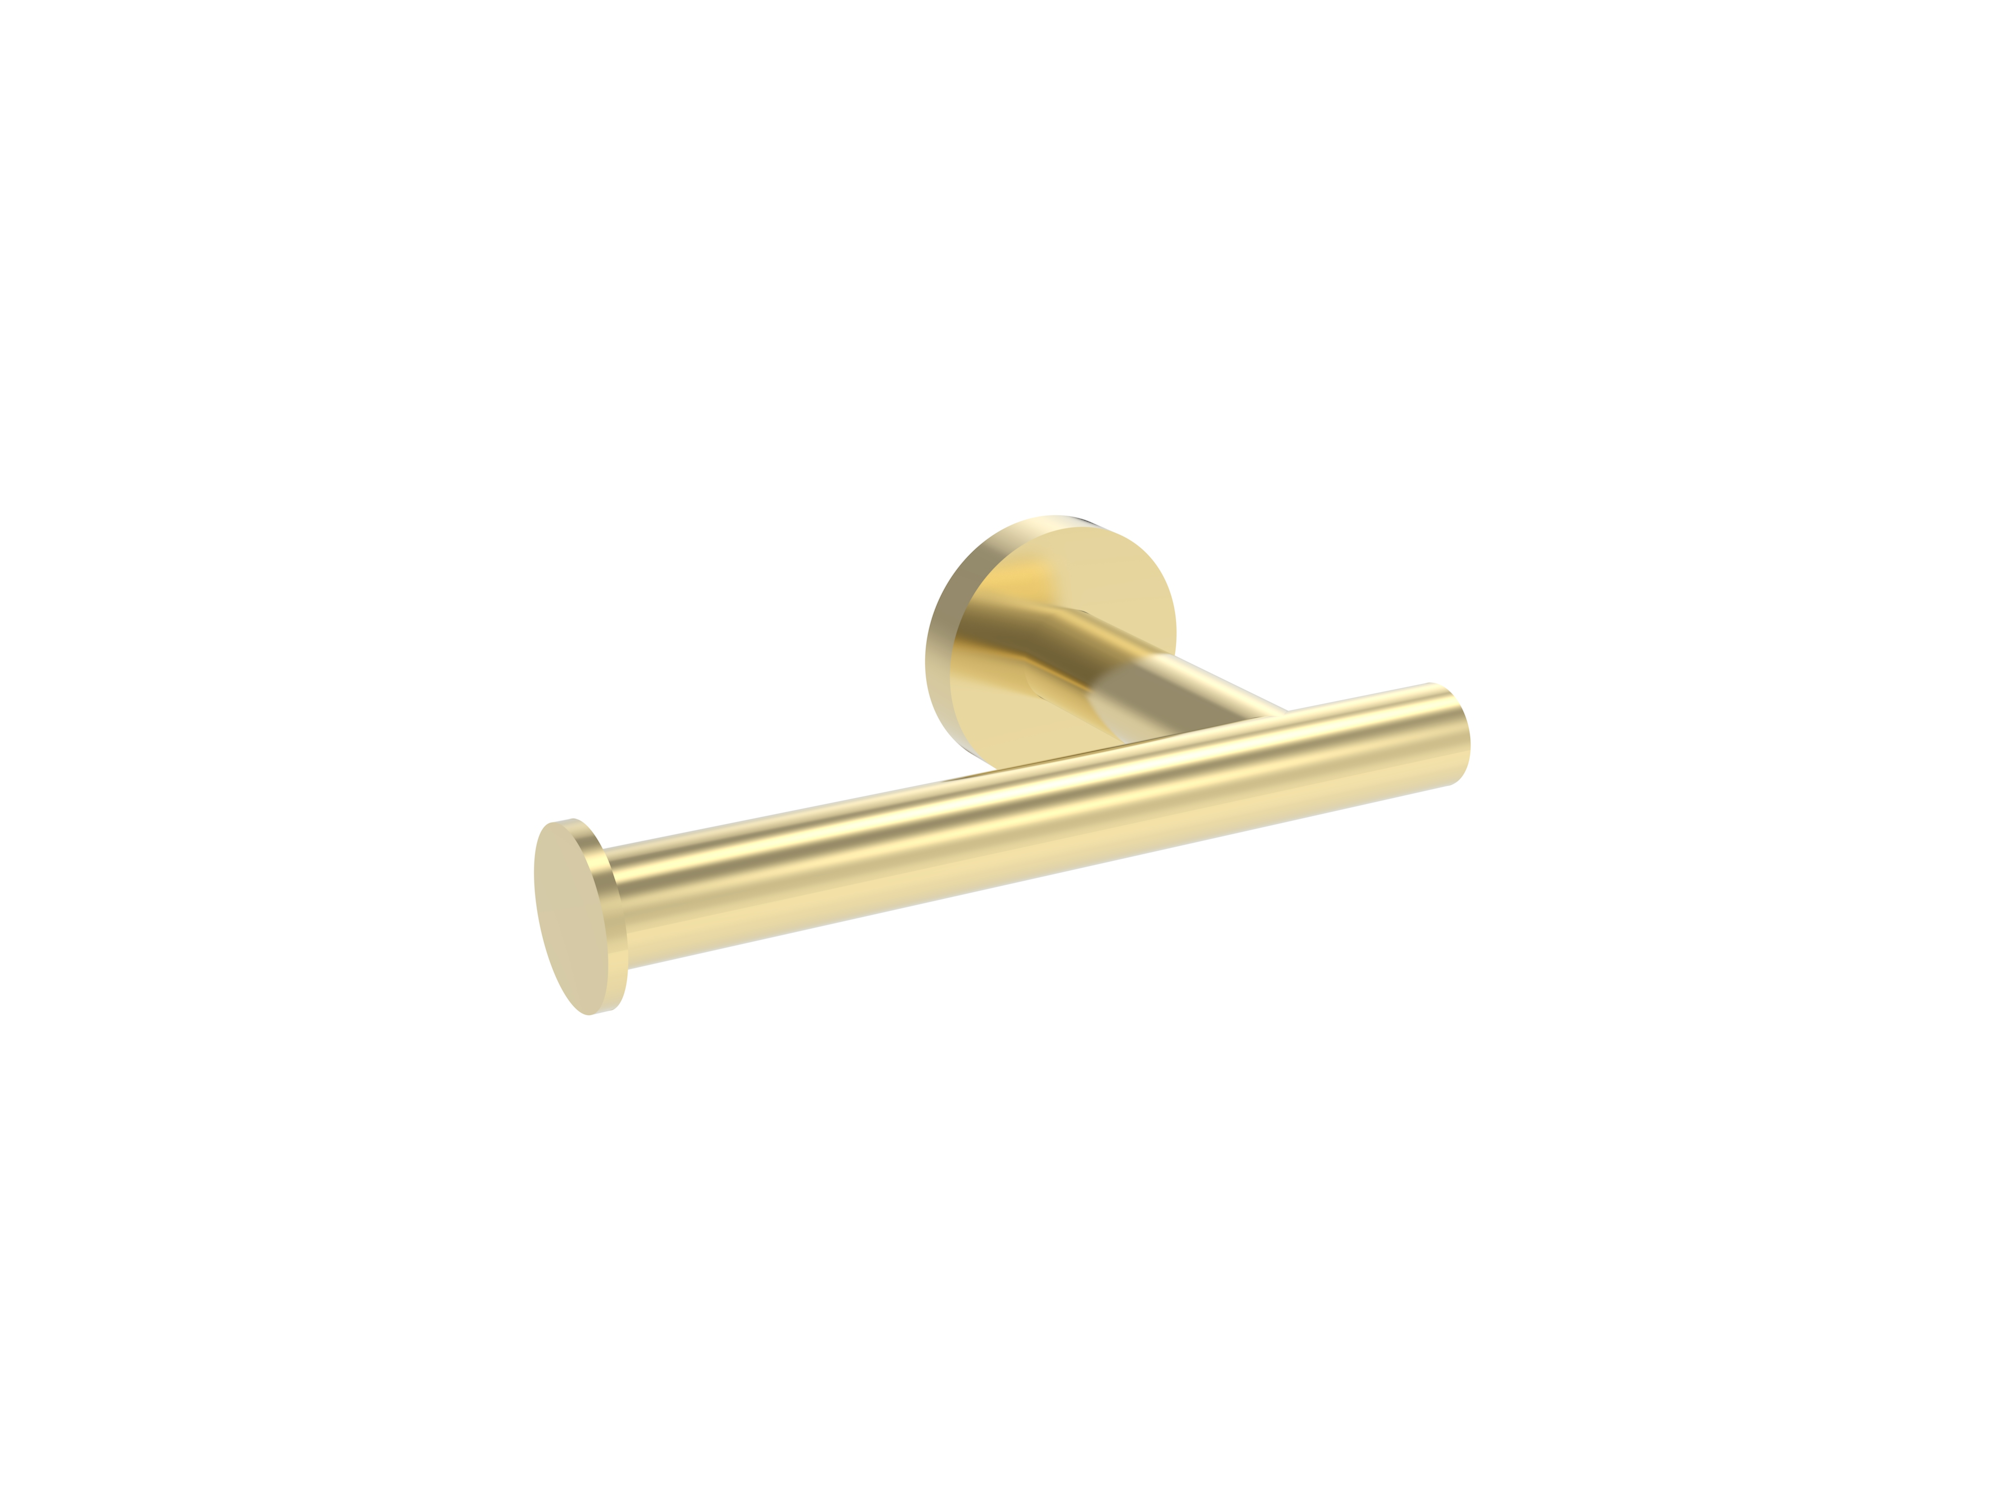 COS toilet roll holder - Brushed Brass